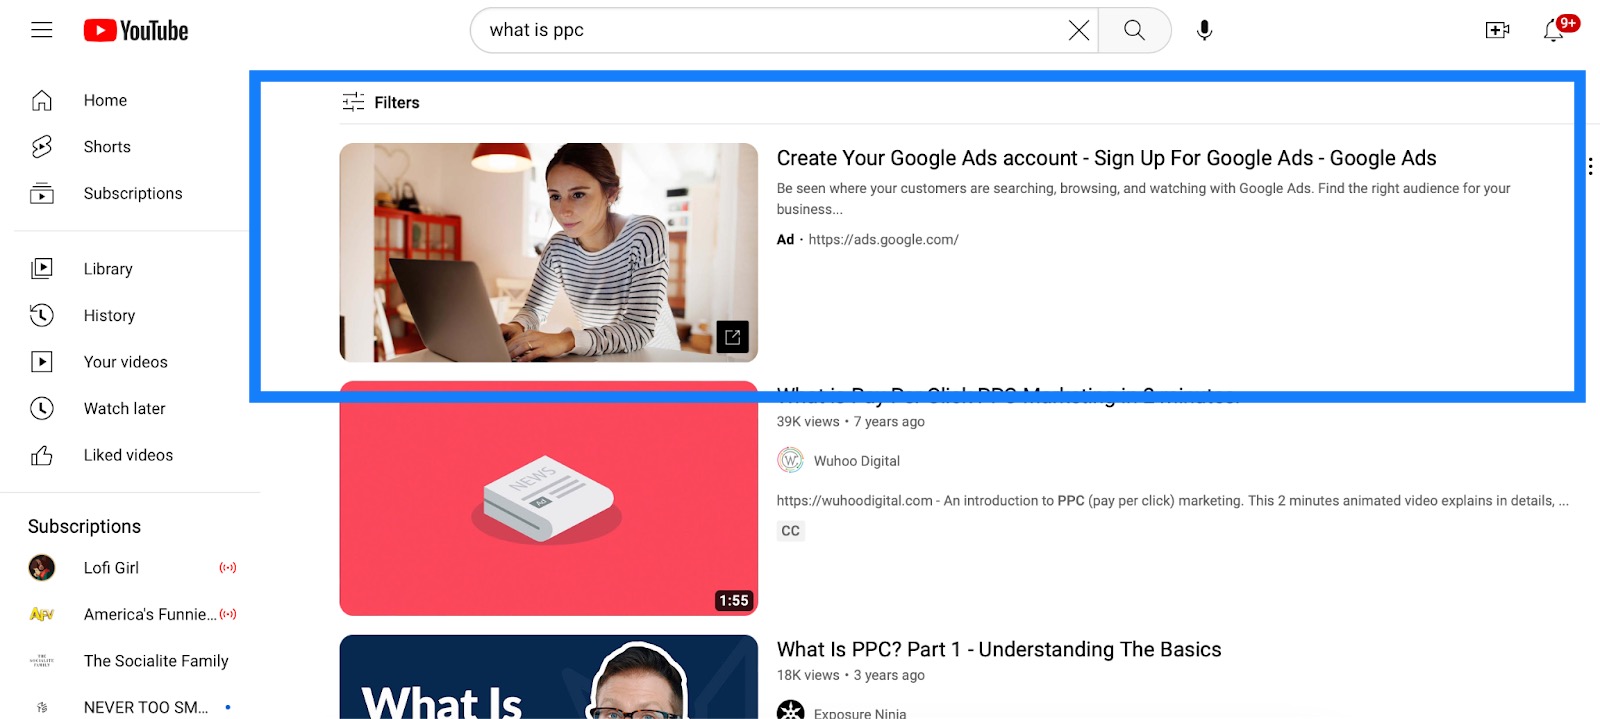 An example of Google advertising Google Ads on a YouTube search for what is ppc.